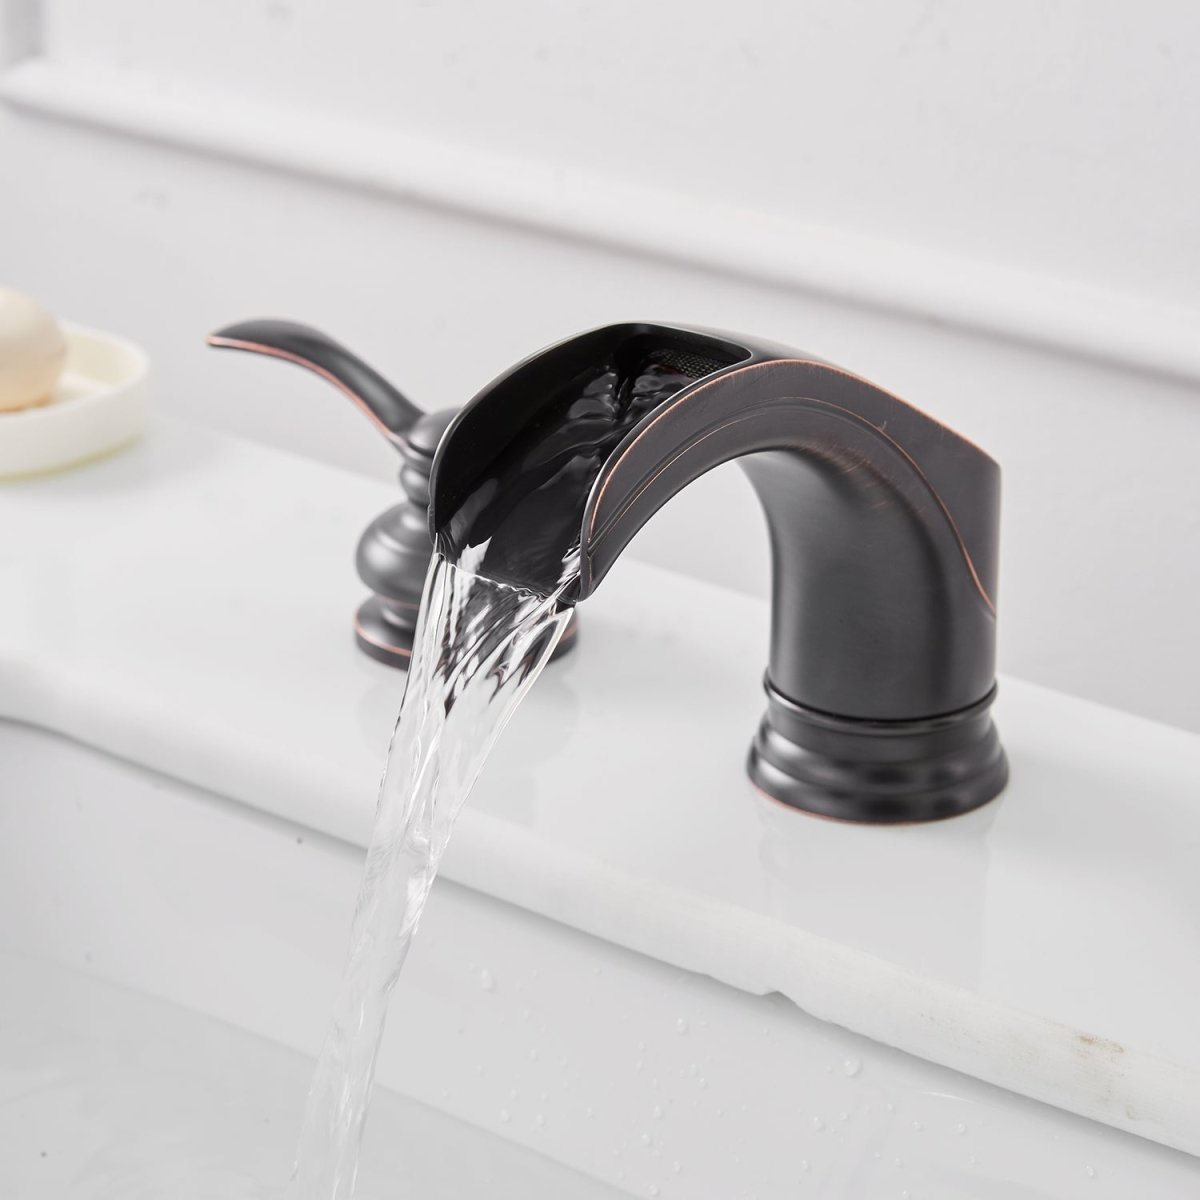 8 in Waterfall 2-Handle Bathroom Faucet Oil Rubbed Bronze - buyfaucet.com